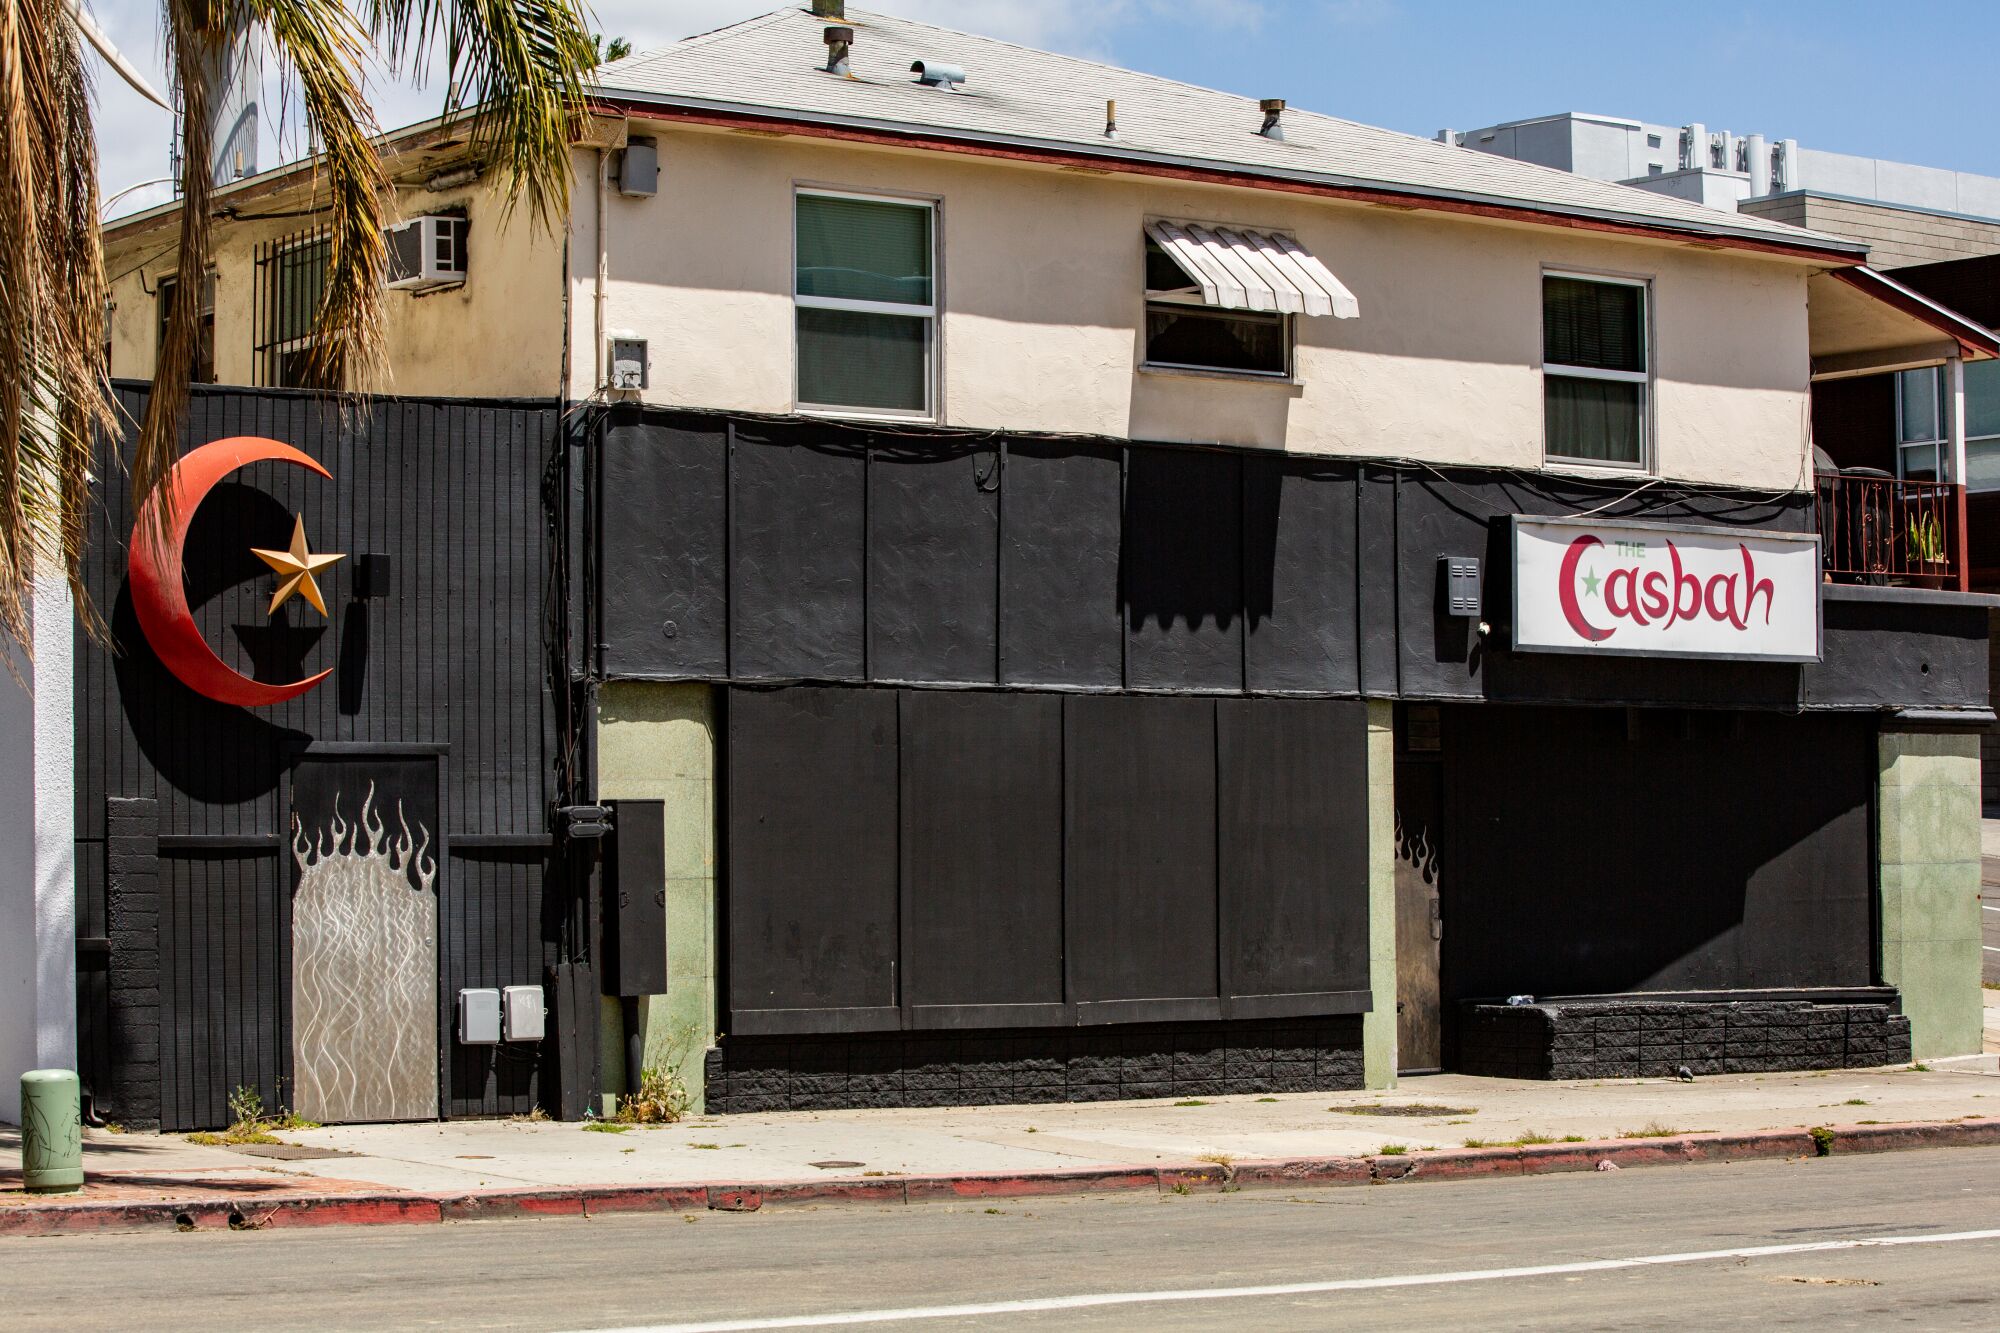 The Casbah, the fabled music venue, is shuttered during the coronavirus pandemic on May 14, 2020 in San Diego, California.